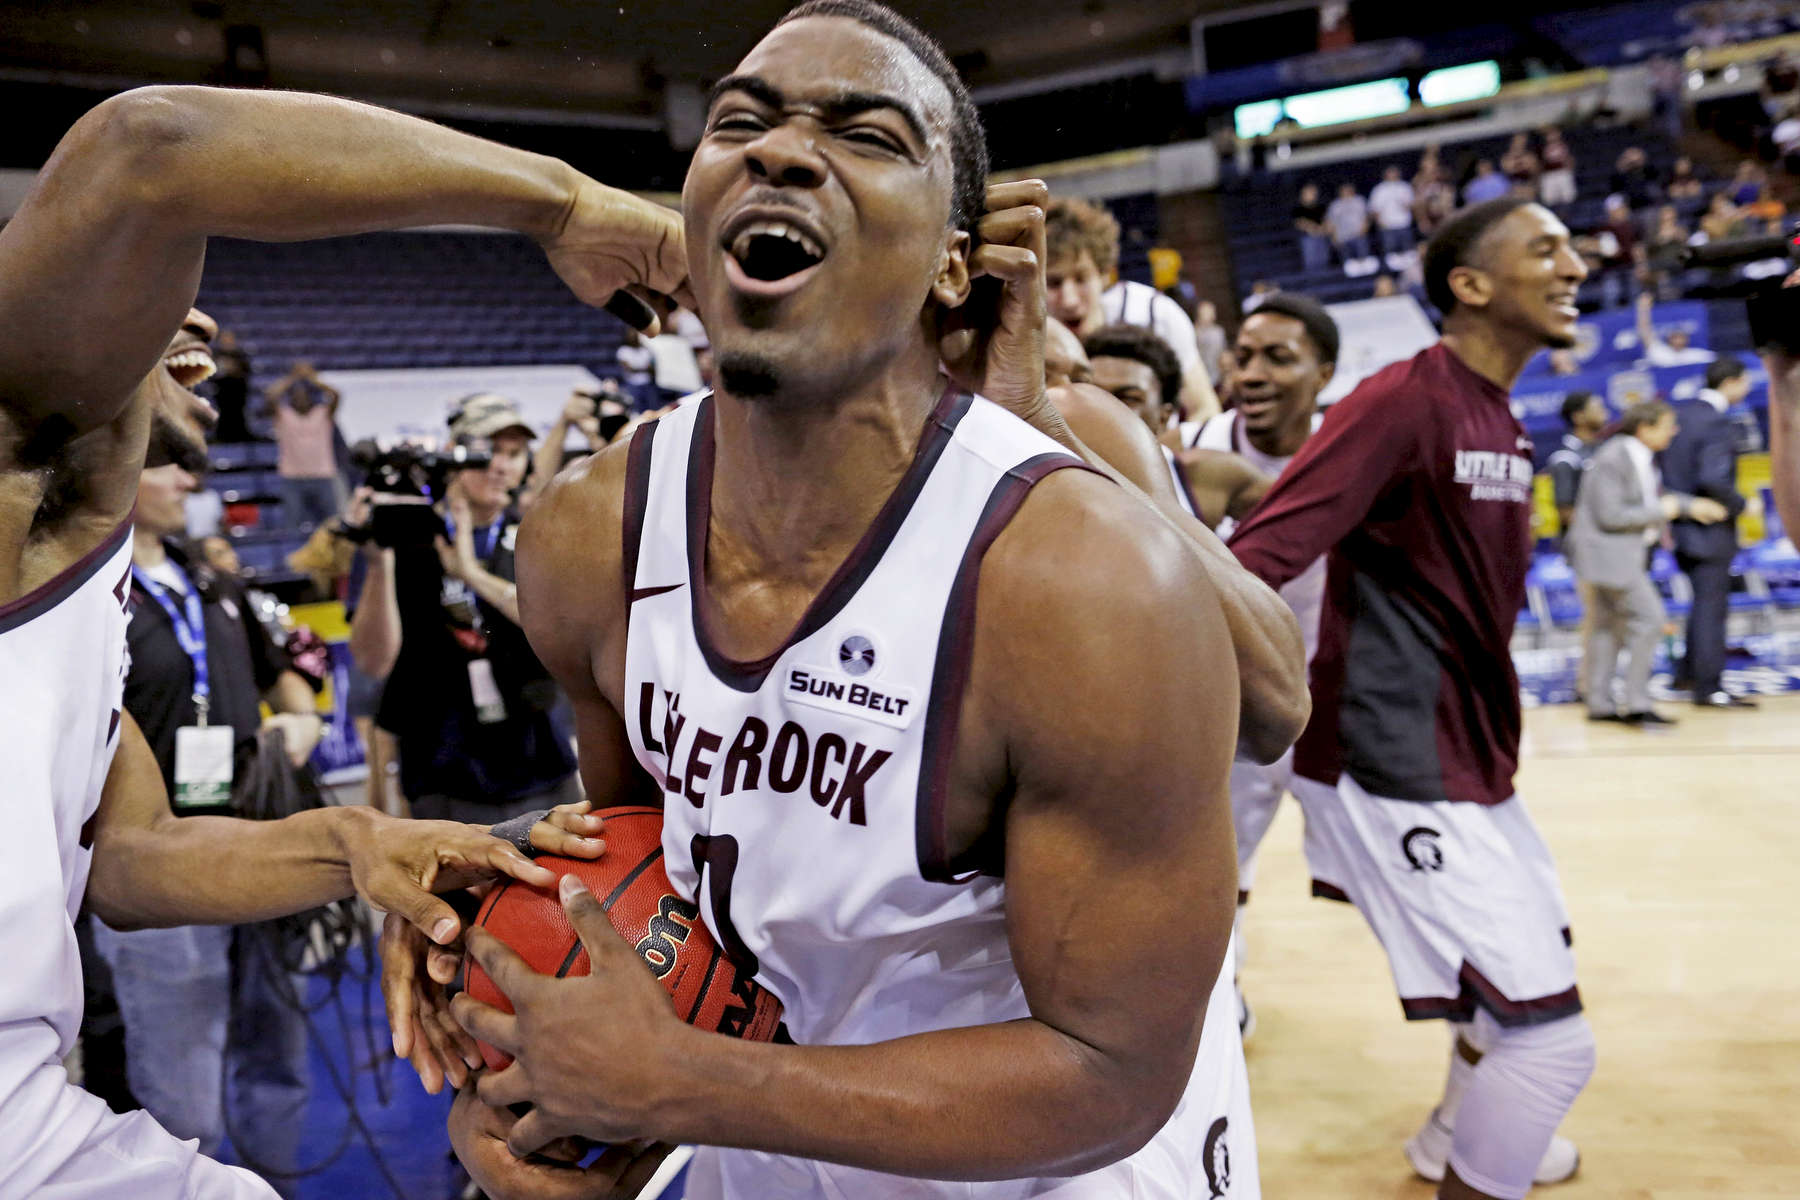 Arkansas Little Rock forward Roger Woods (0) celebrates the win over Louisiana Monroe with his teammates at the conclusion of an NCAA college basketball game in the championship of the Sun Belt Conference men's tournament in New Orleans, Sunday, March 13, 2016. Arkansas Little Rock beat Louisiana Monroe 70-50. (AP Photo/Max Becherer)